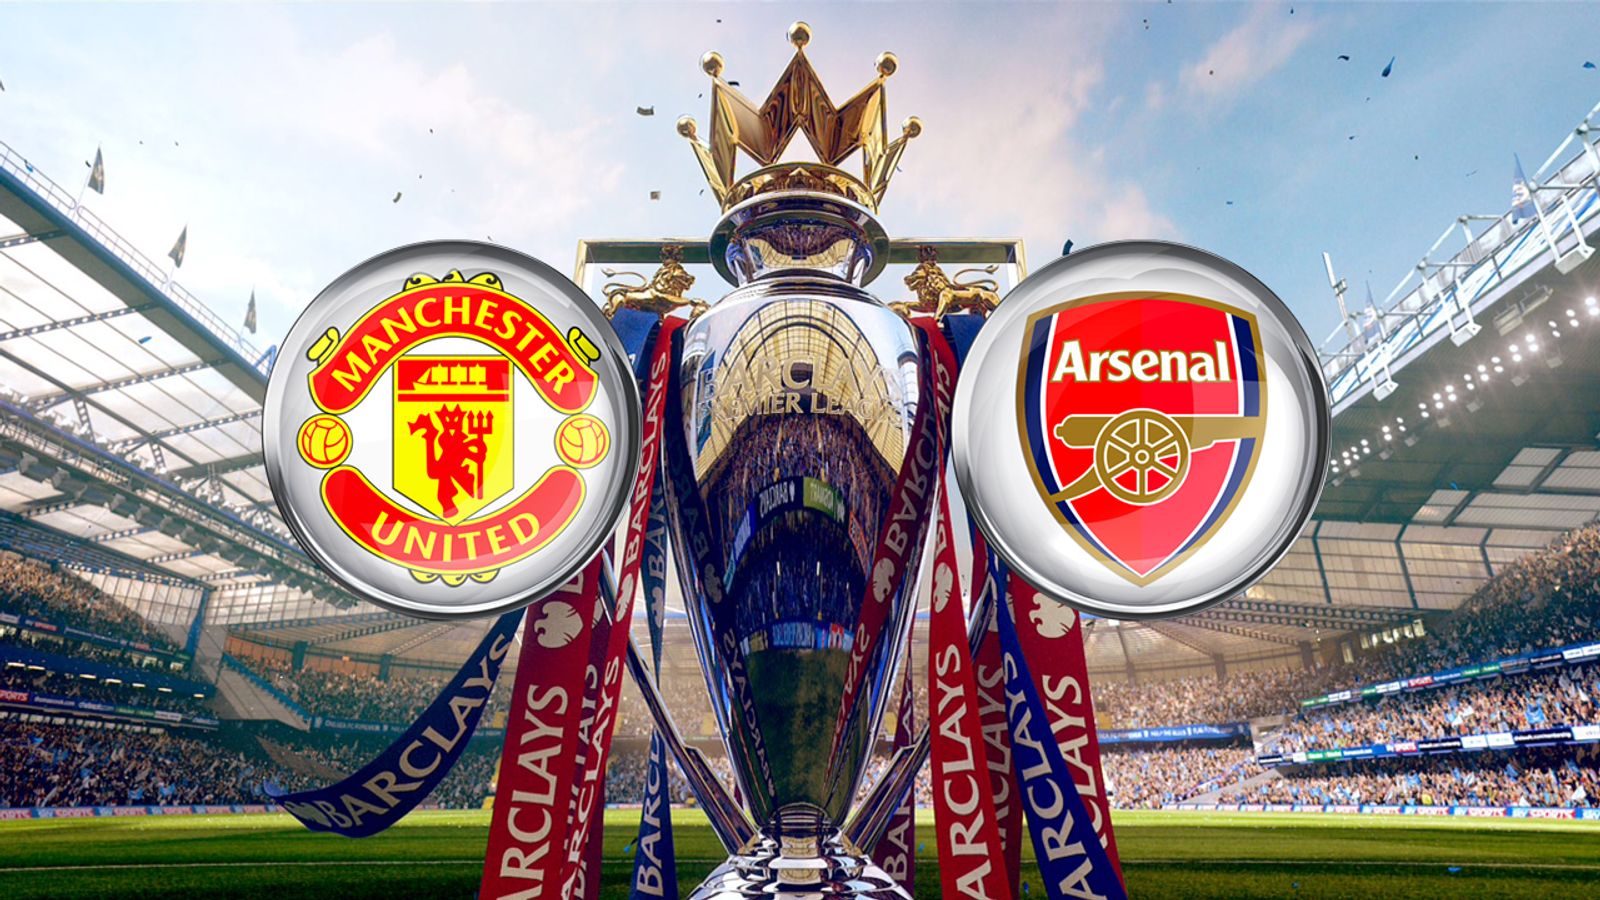 Manchester United v Arsenal preview Anthony Martial doubtful for Super